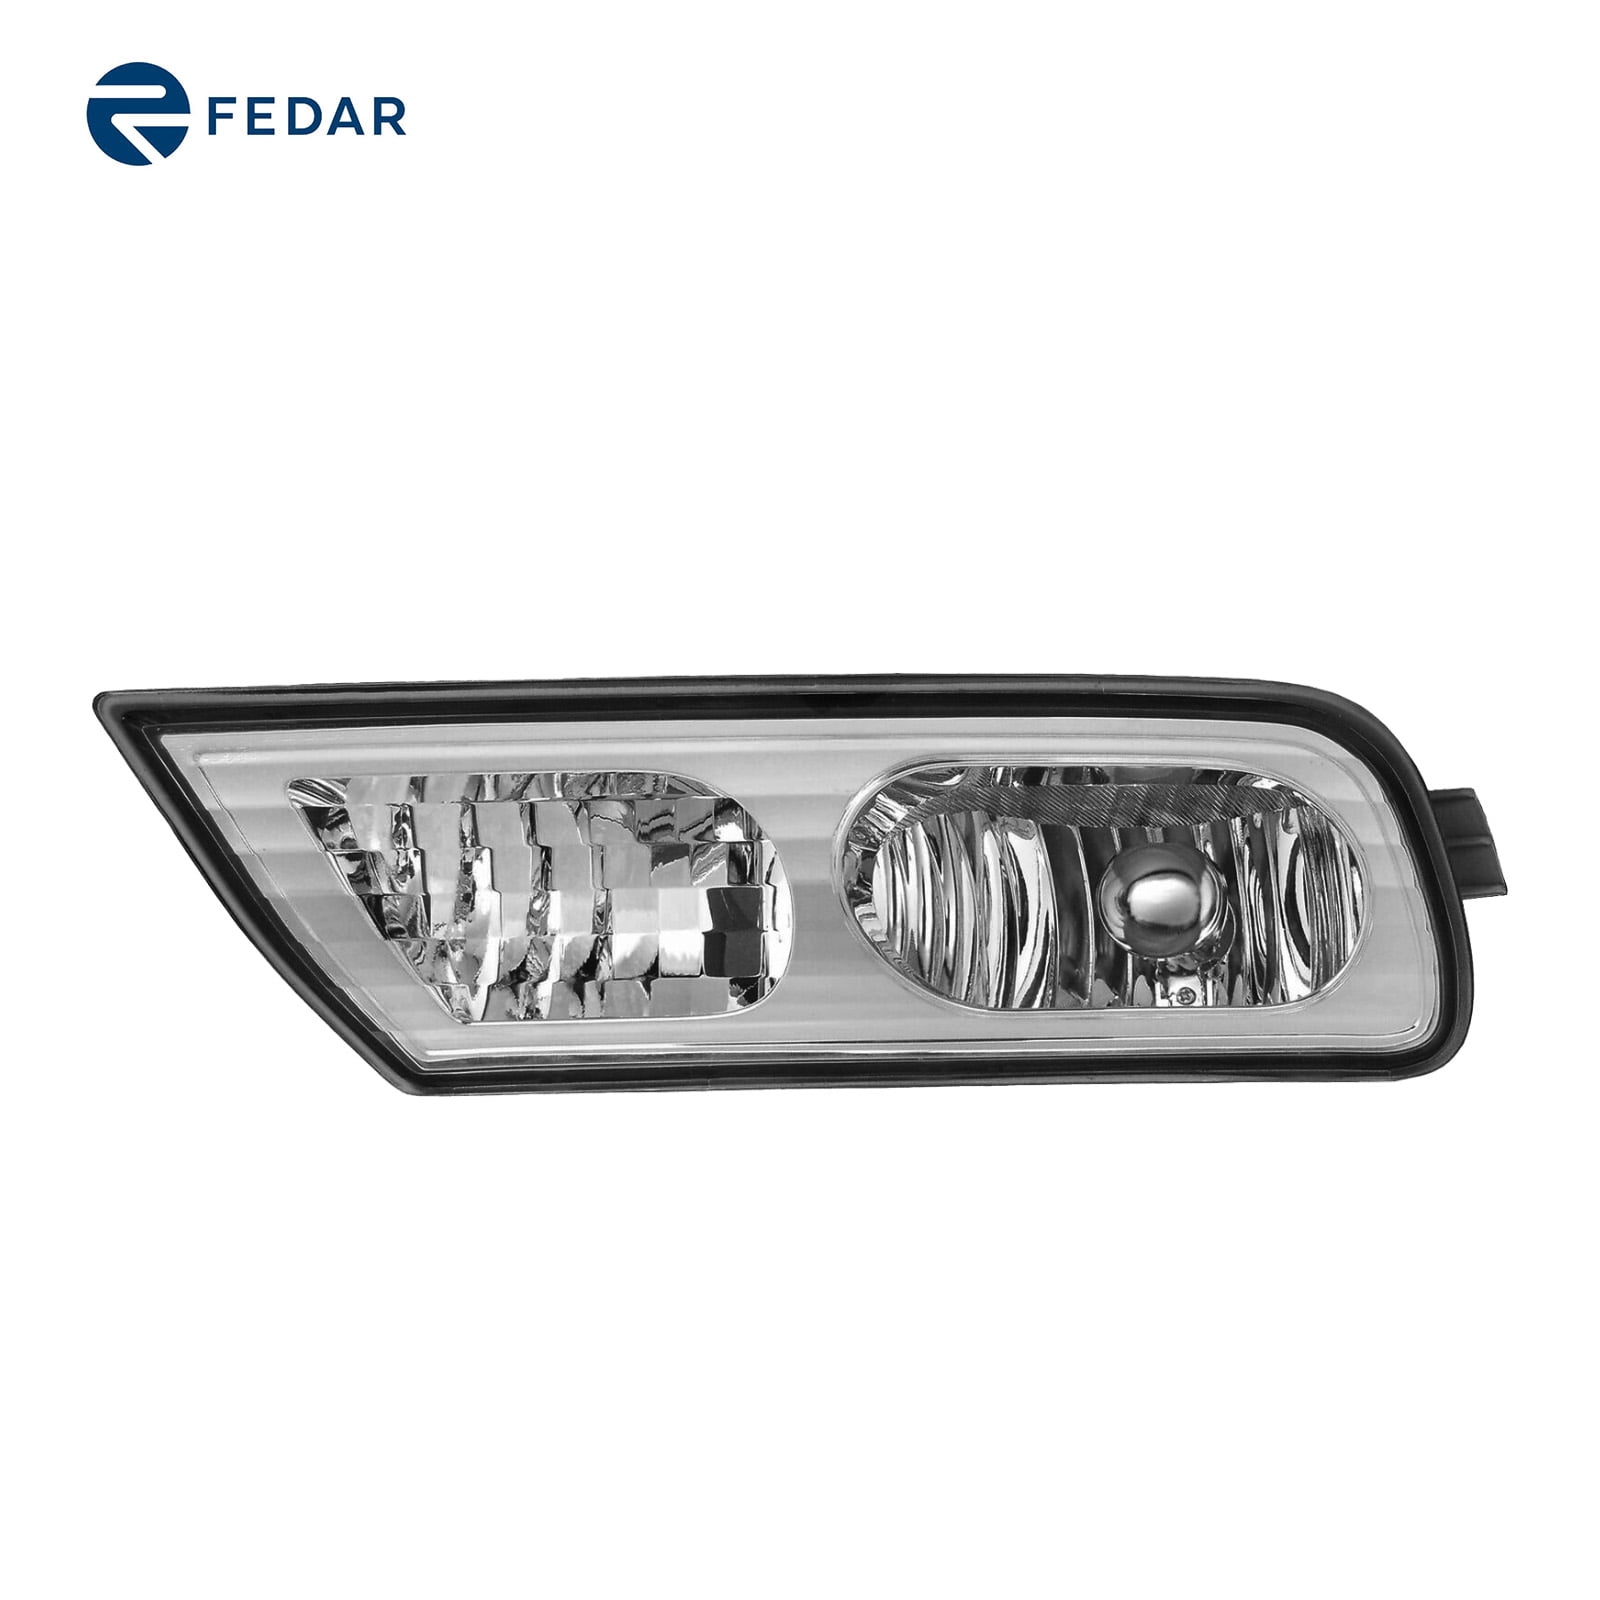 Minor Visual Flaw OEM Acura MDX Outer Right Passenger Side Tail Lamp